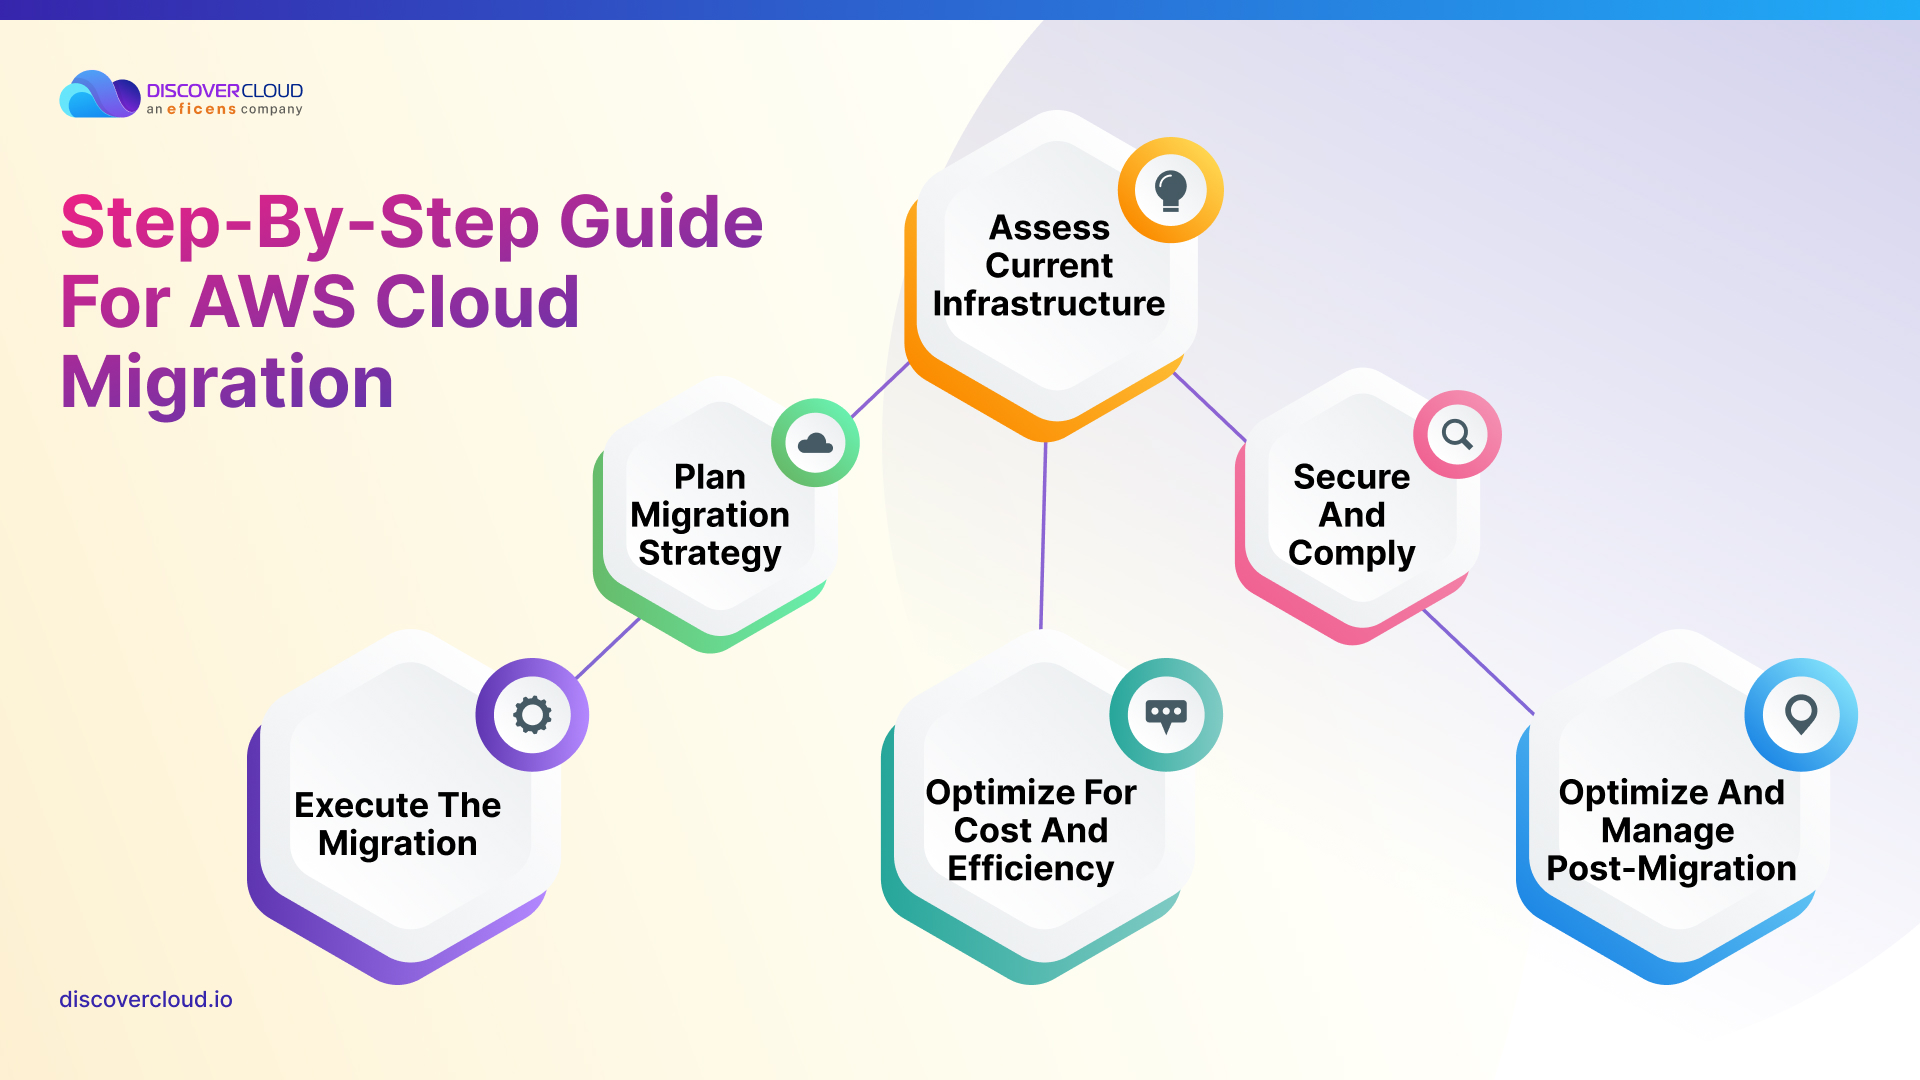 Step-by-Step Guide for AWS Cloud Migration